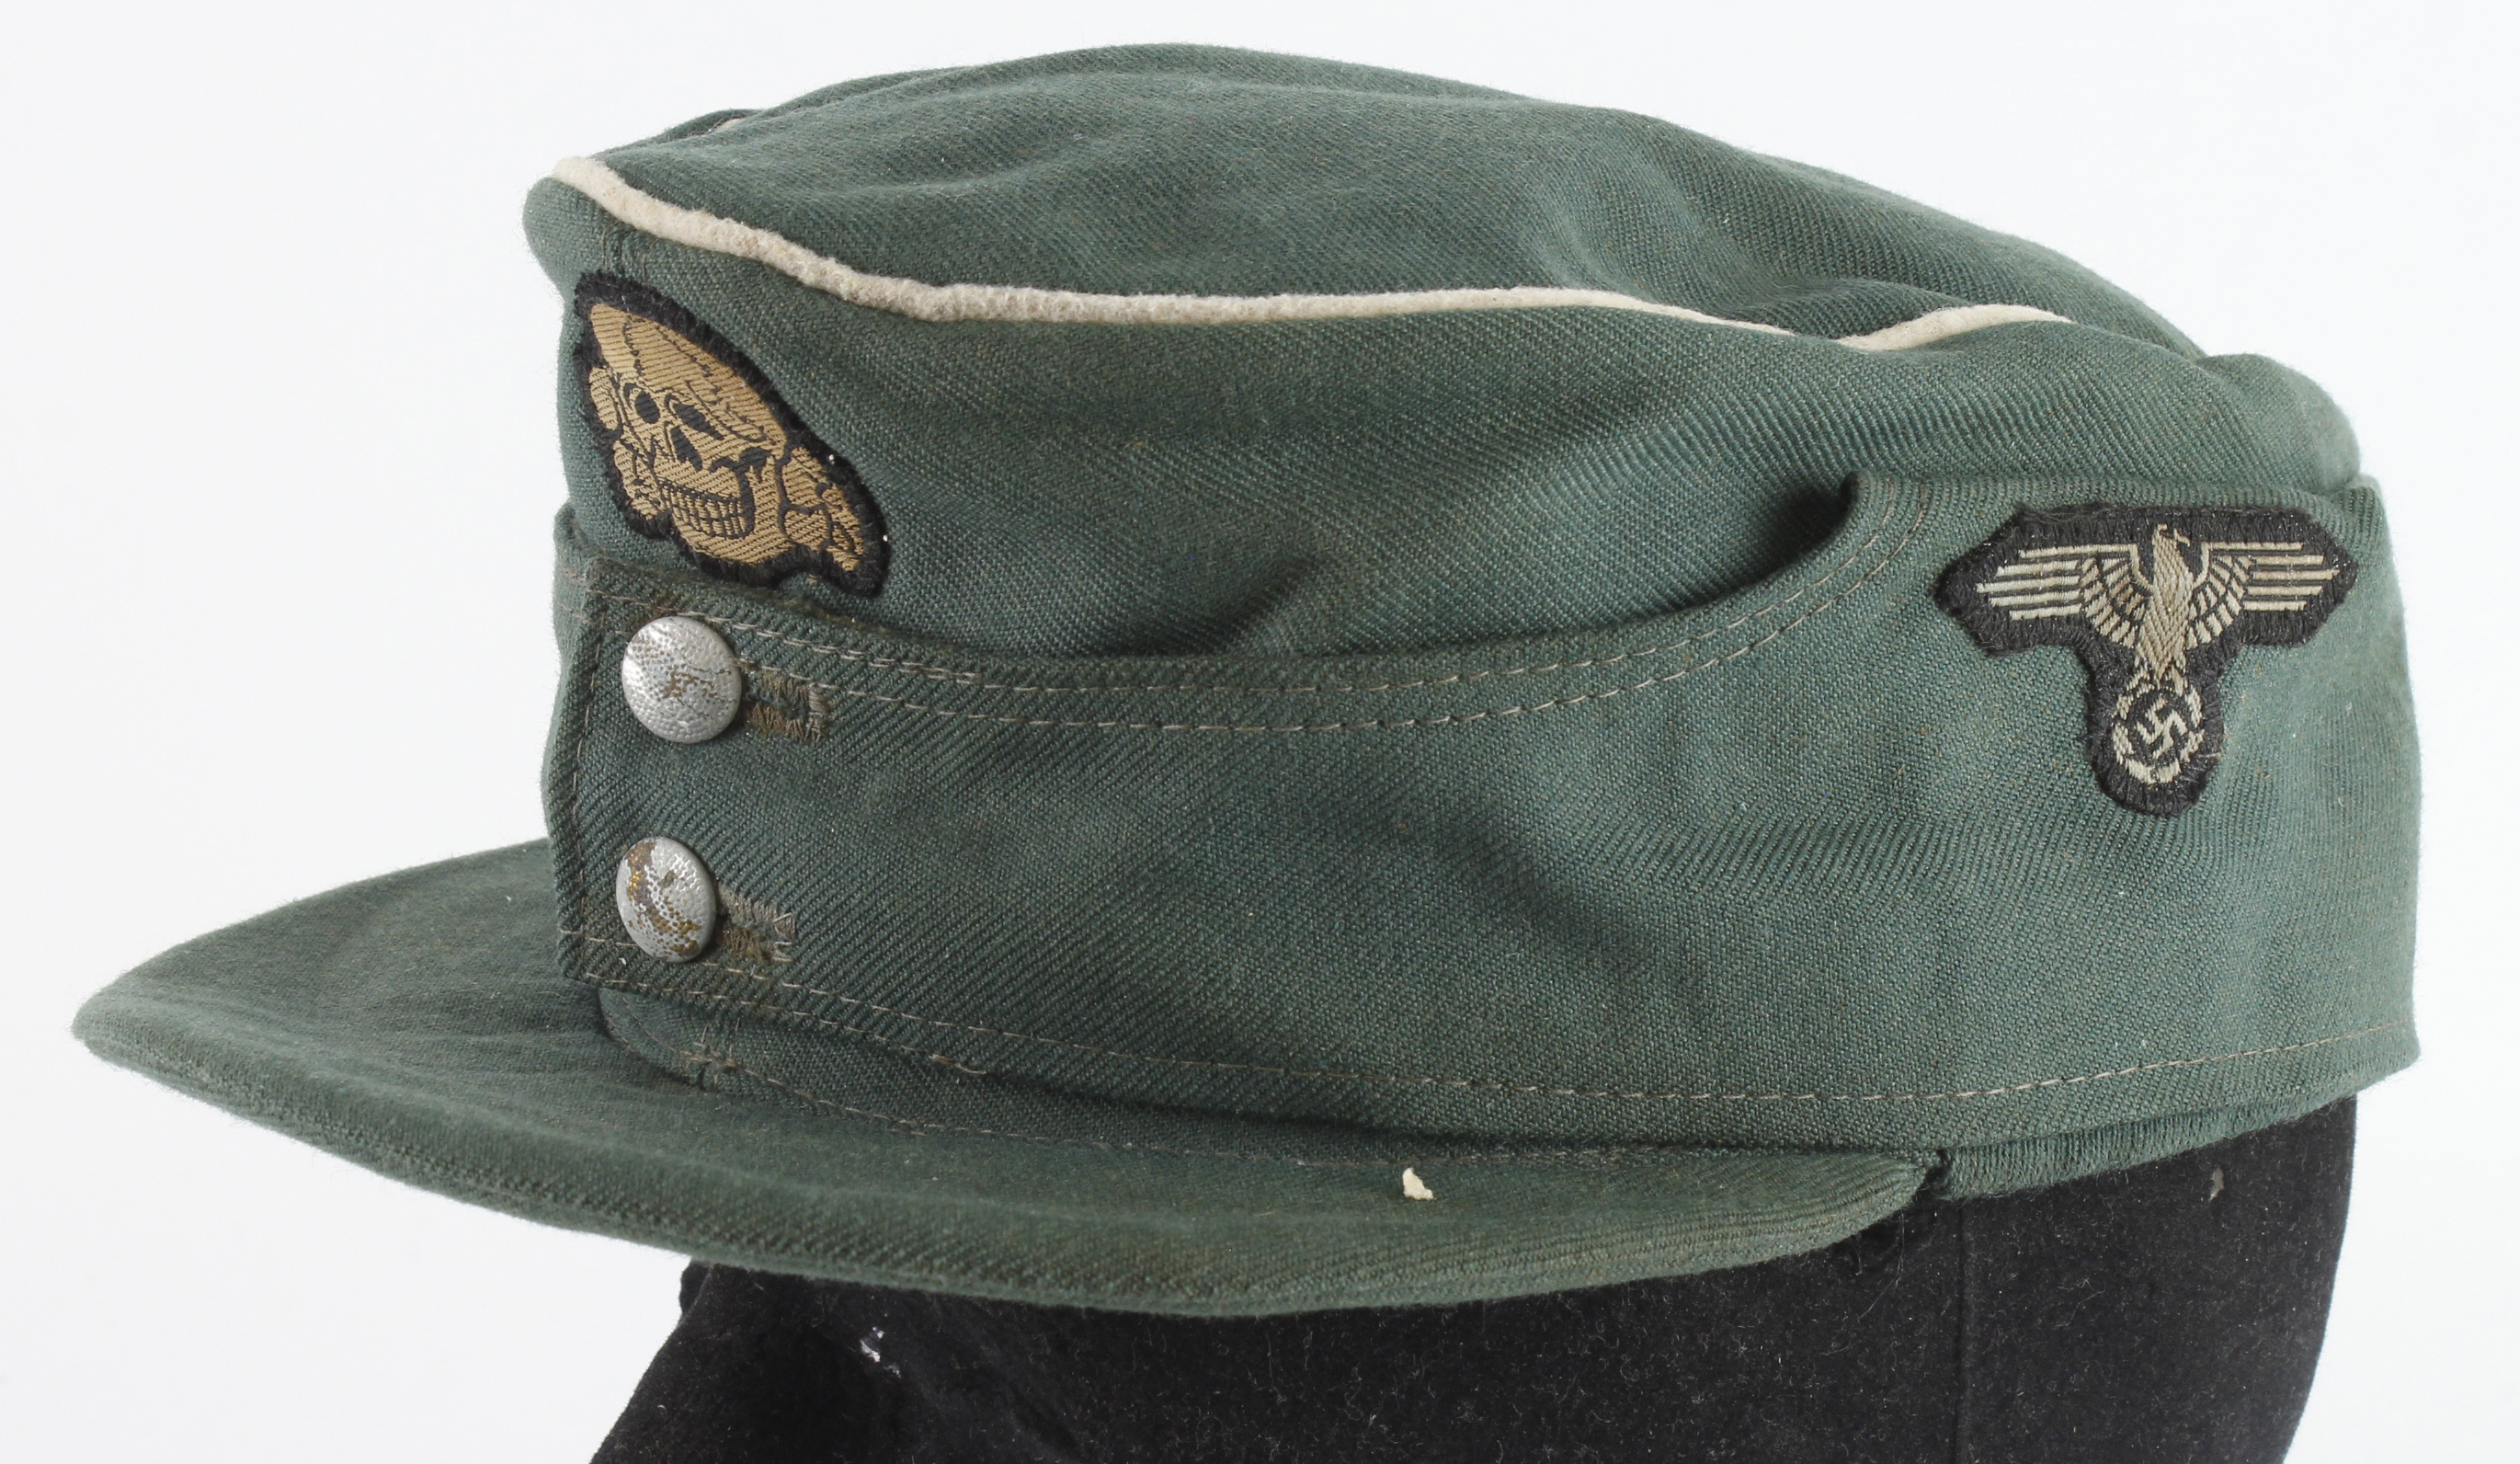 German Waffen SS M42 Forage cap, infantry white piping, officer quality cloth, likely senior NCO